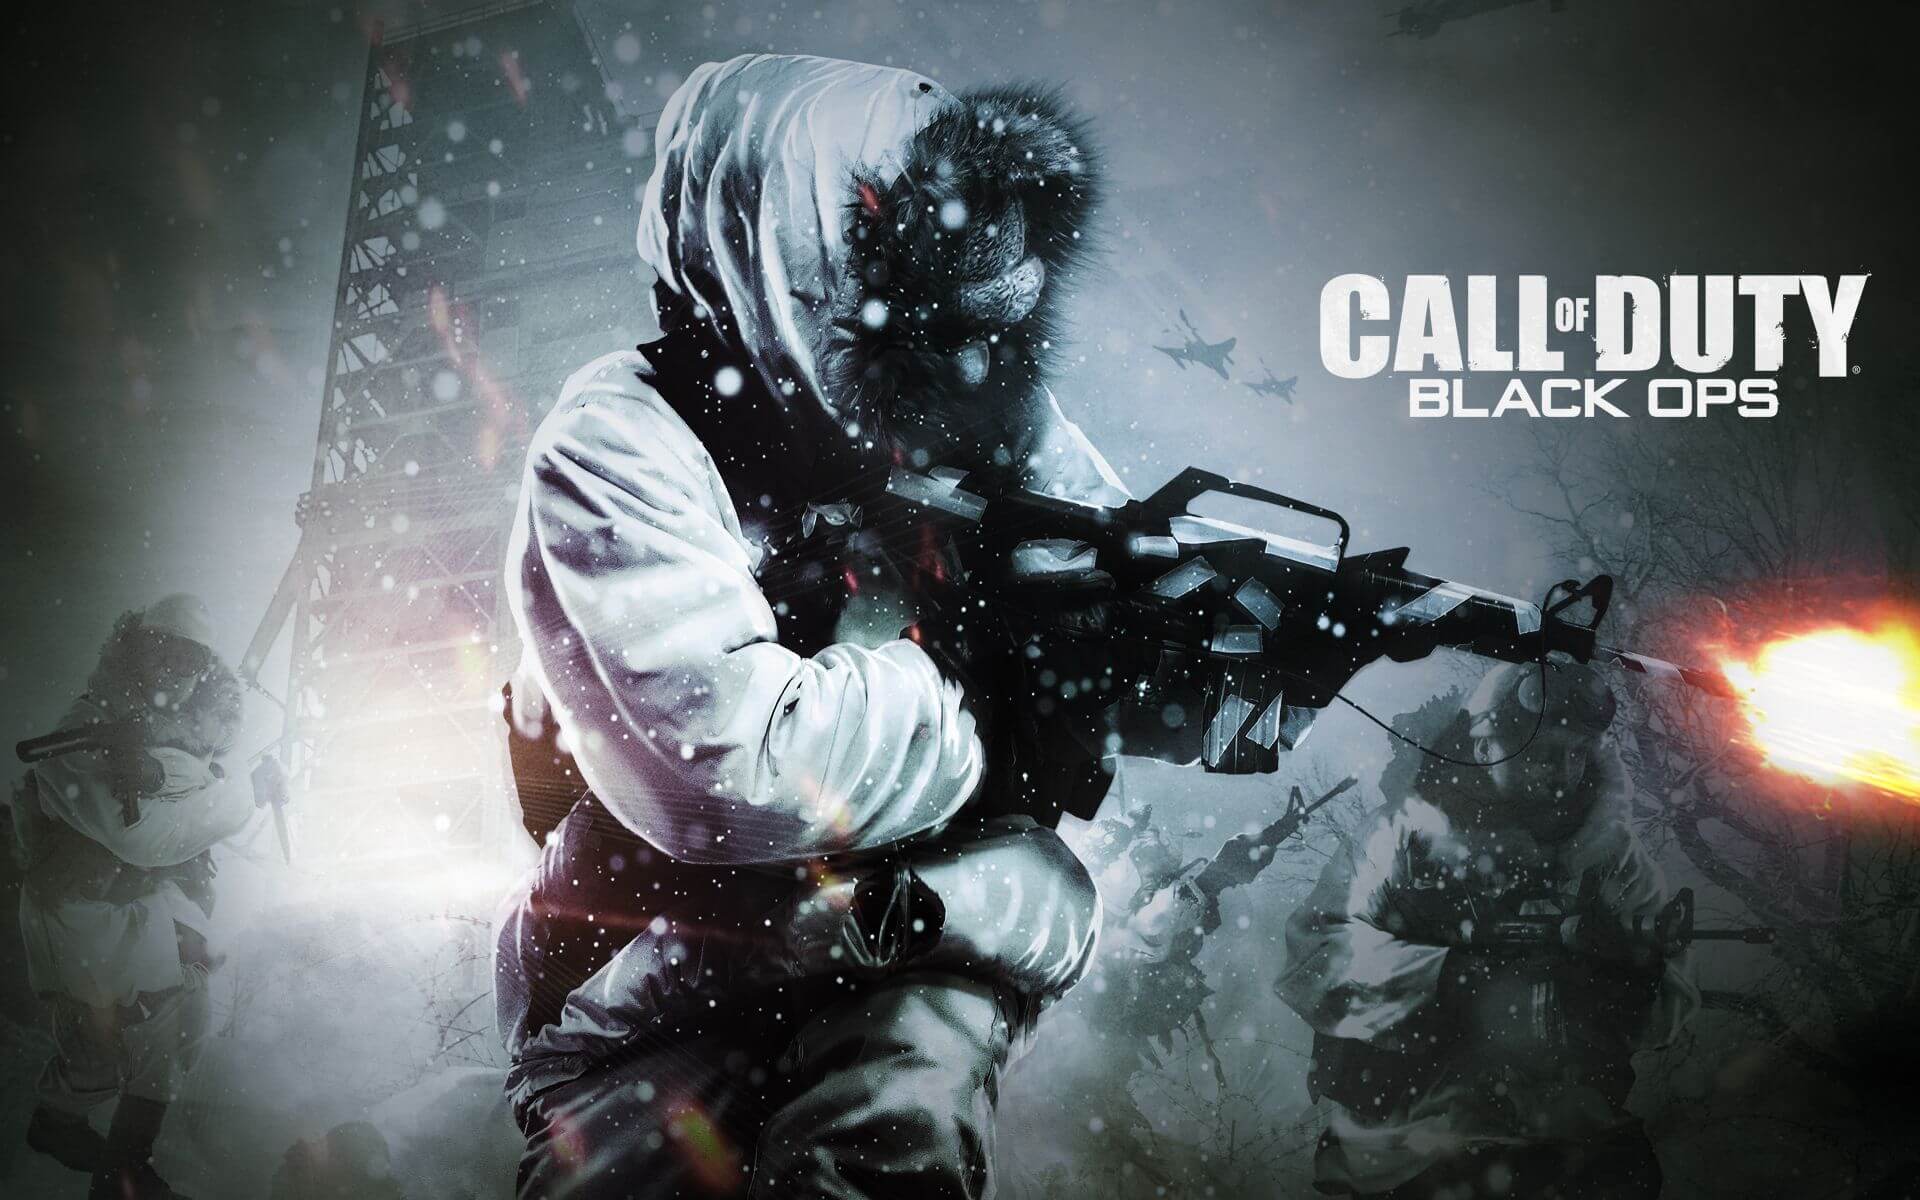 DOWNLOAD CALL OF DUTY BLACK OPS PC GAME HIGHLY COMPRESSED IN 500 MB PARTS - TRAX GAMING CENTER